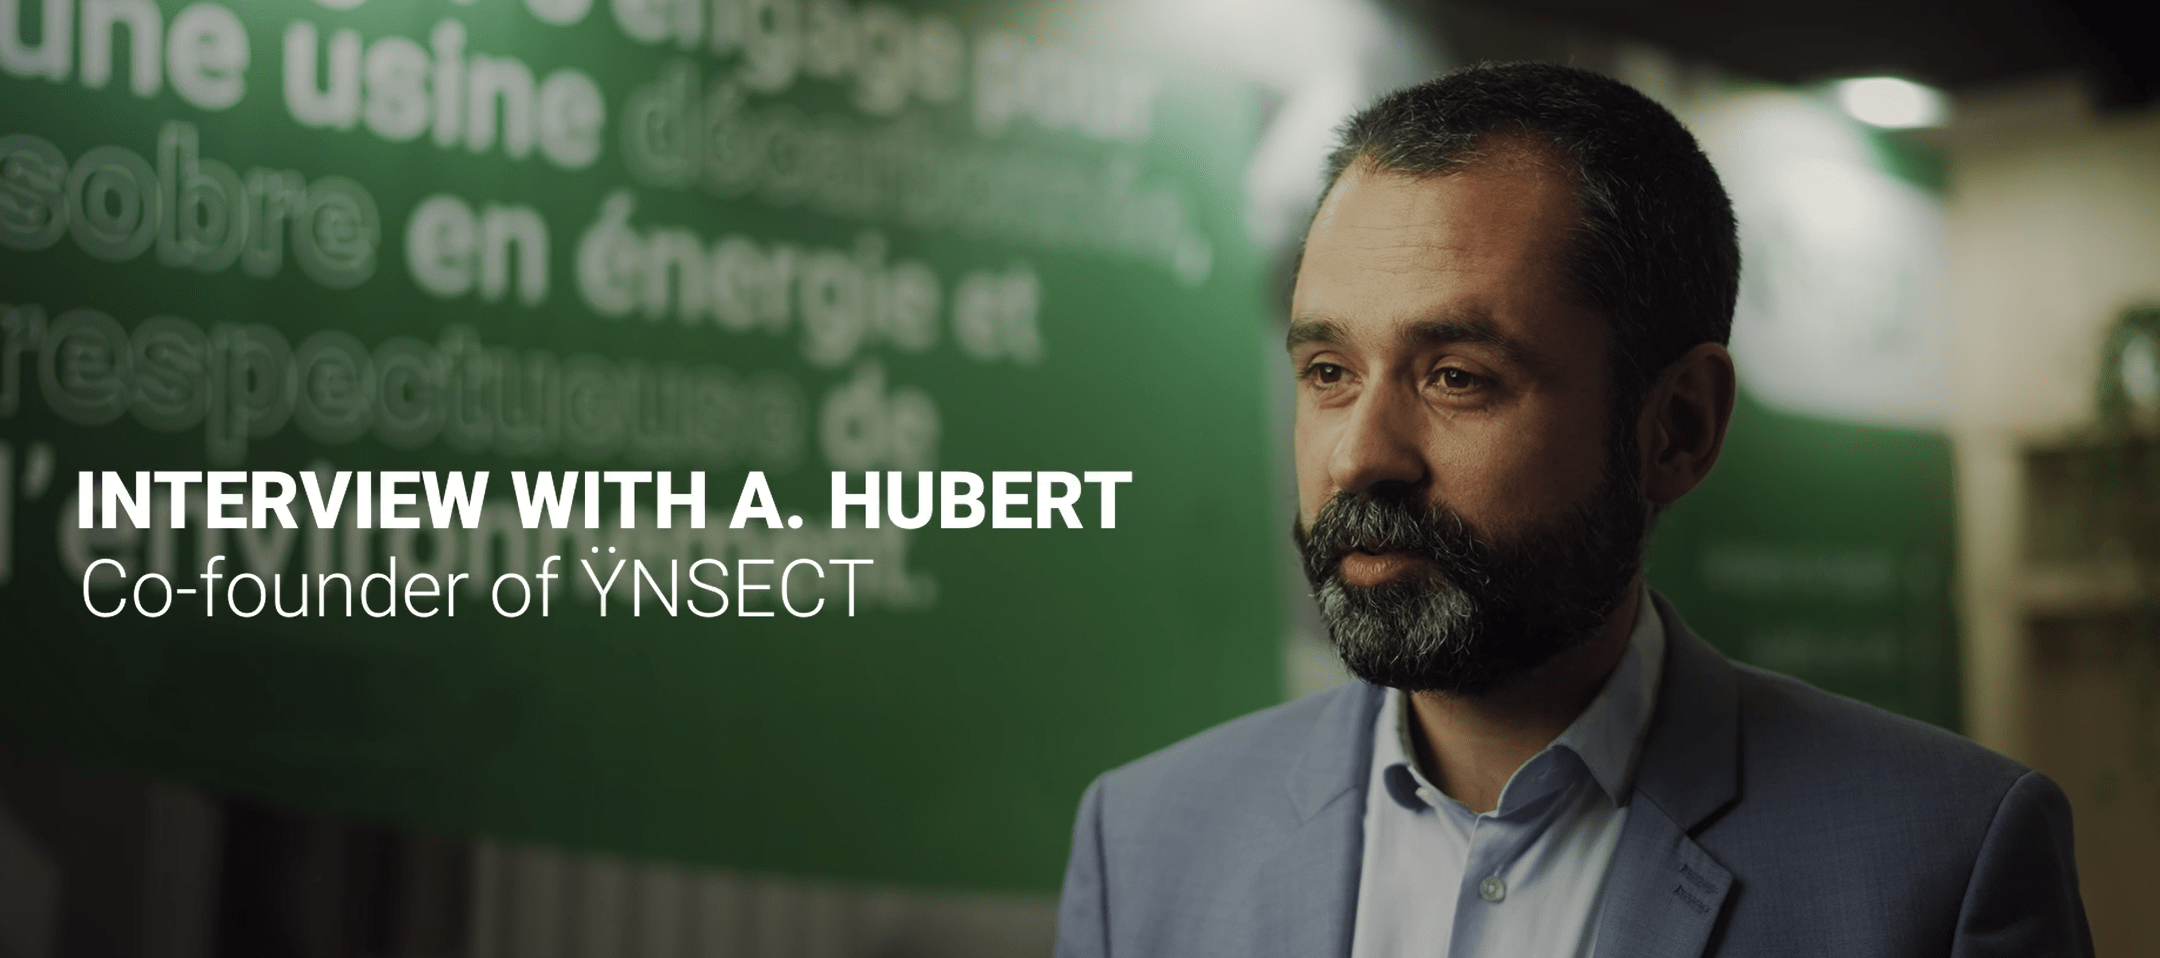 Clauger interviews Ynsect